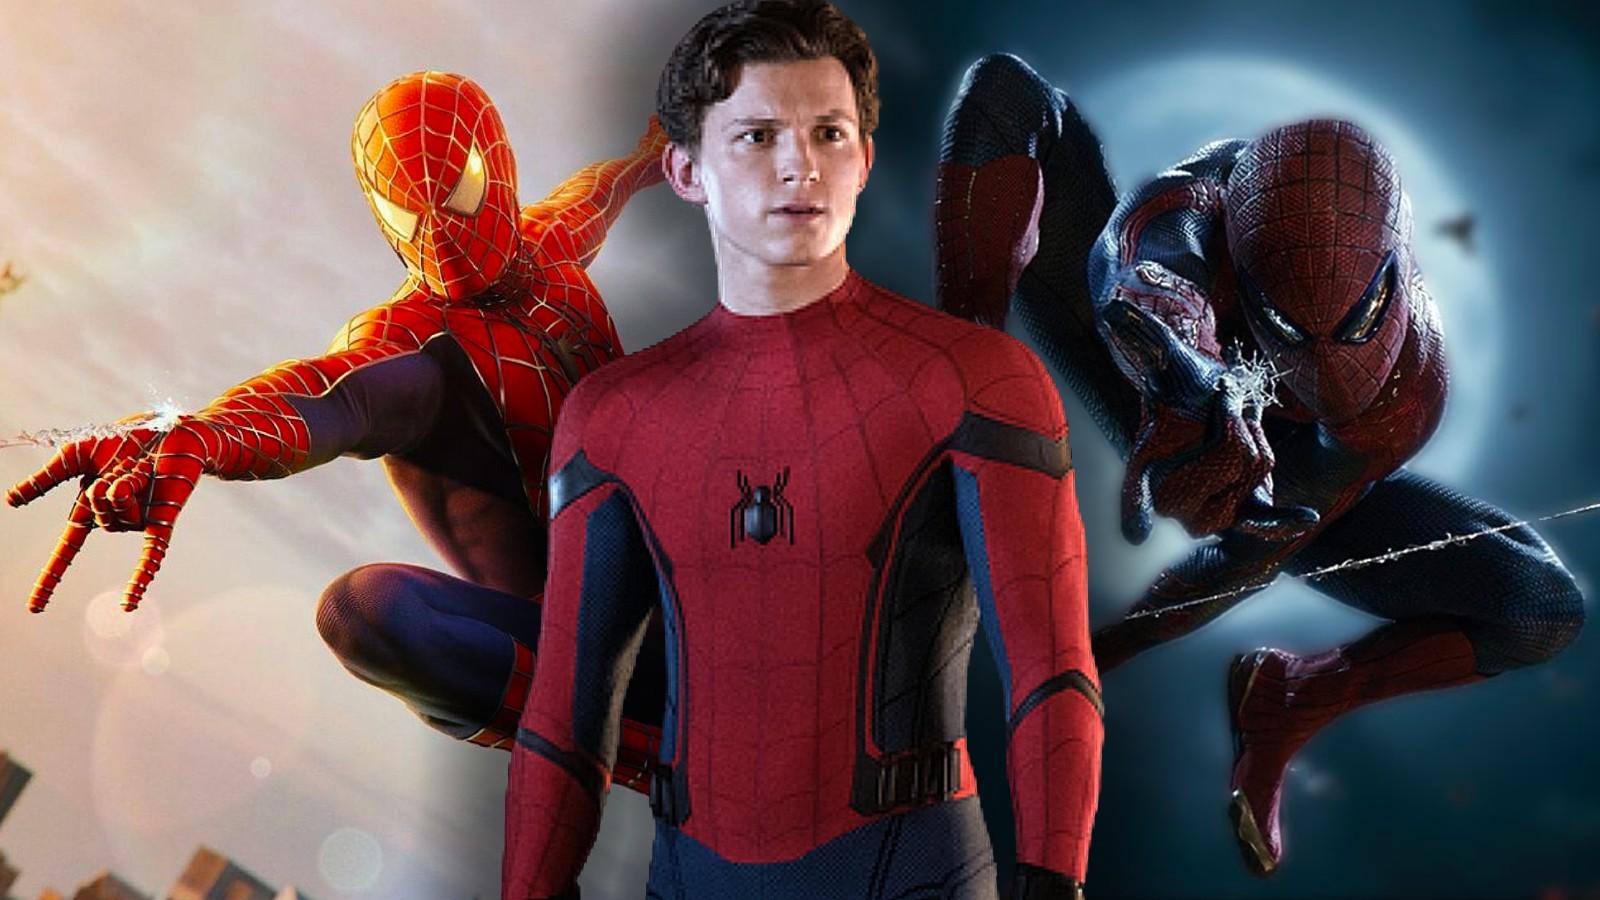 Tom Holland as Spider-Man and stills from the other Spider-Man movies